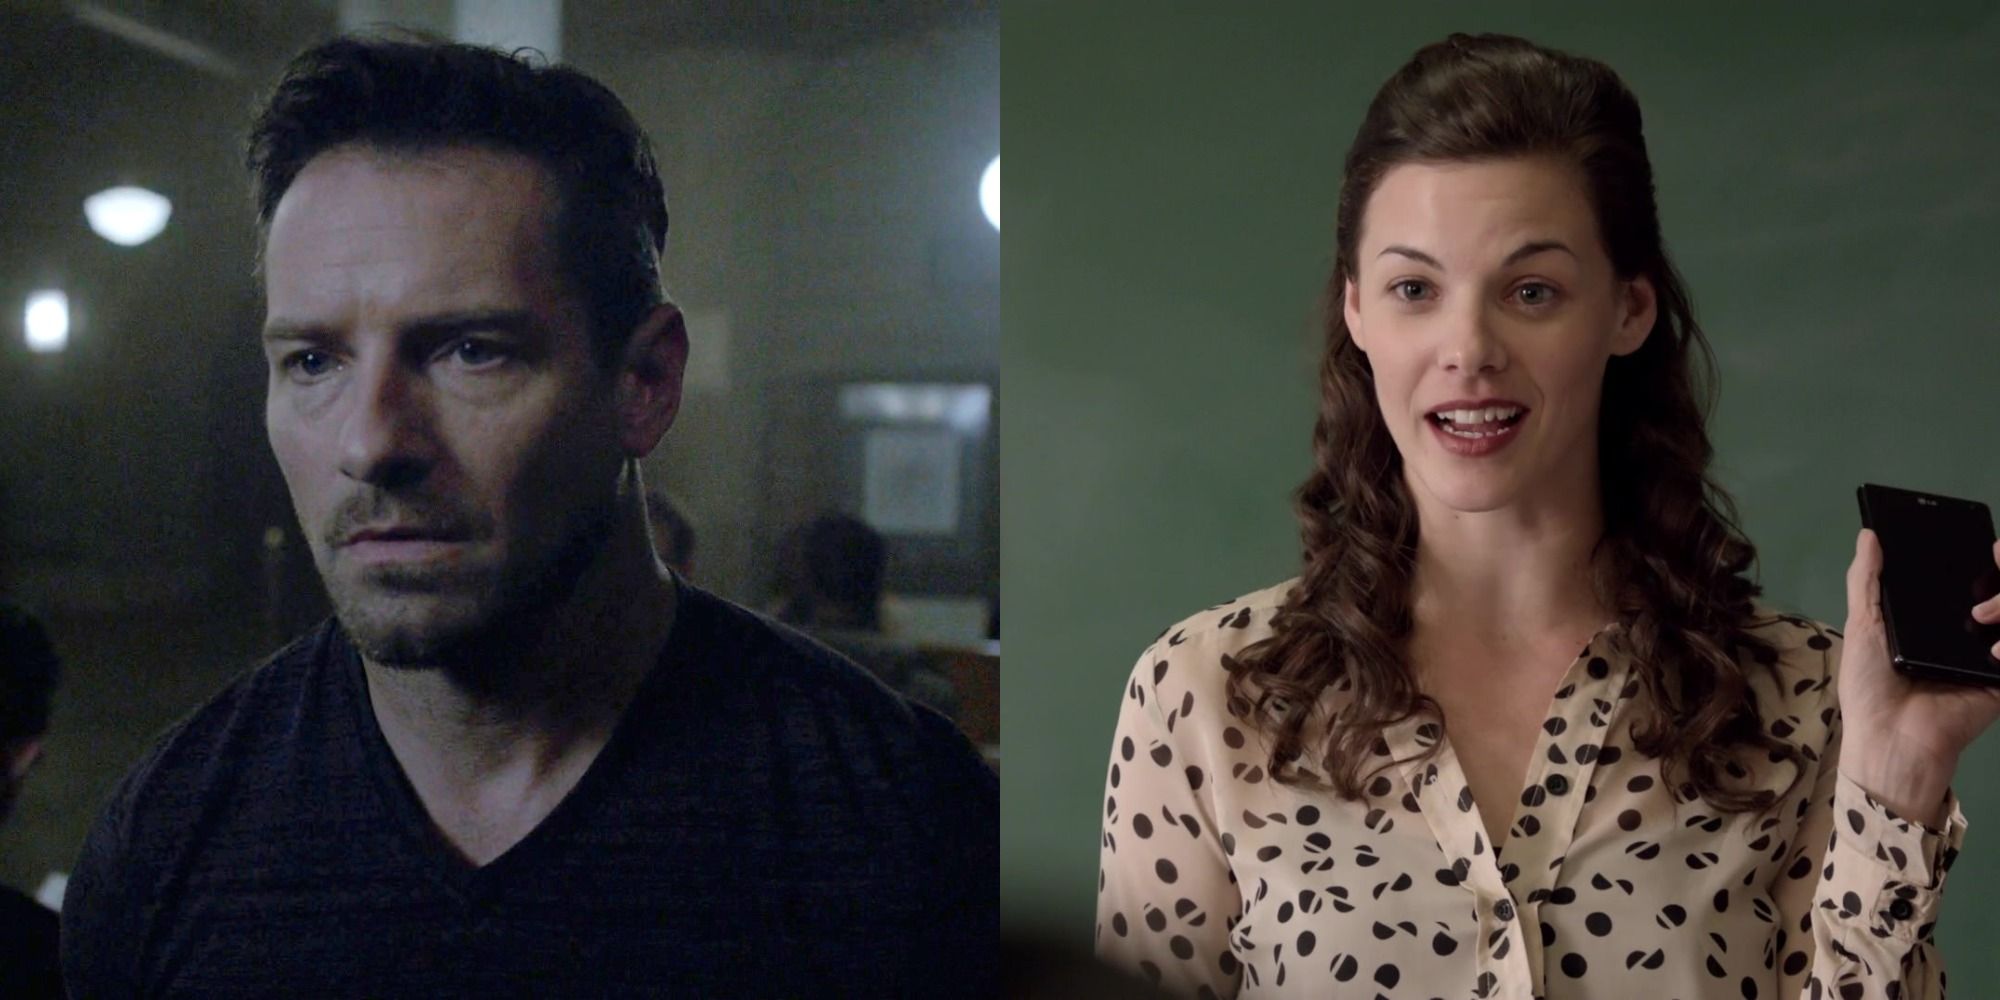 A split image of Peter Hale in the Ghost Rider's train station and Jennifer Blake holding up a mobile phone in a classroom from Teen Wolf